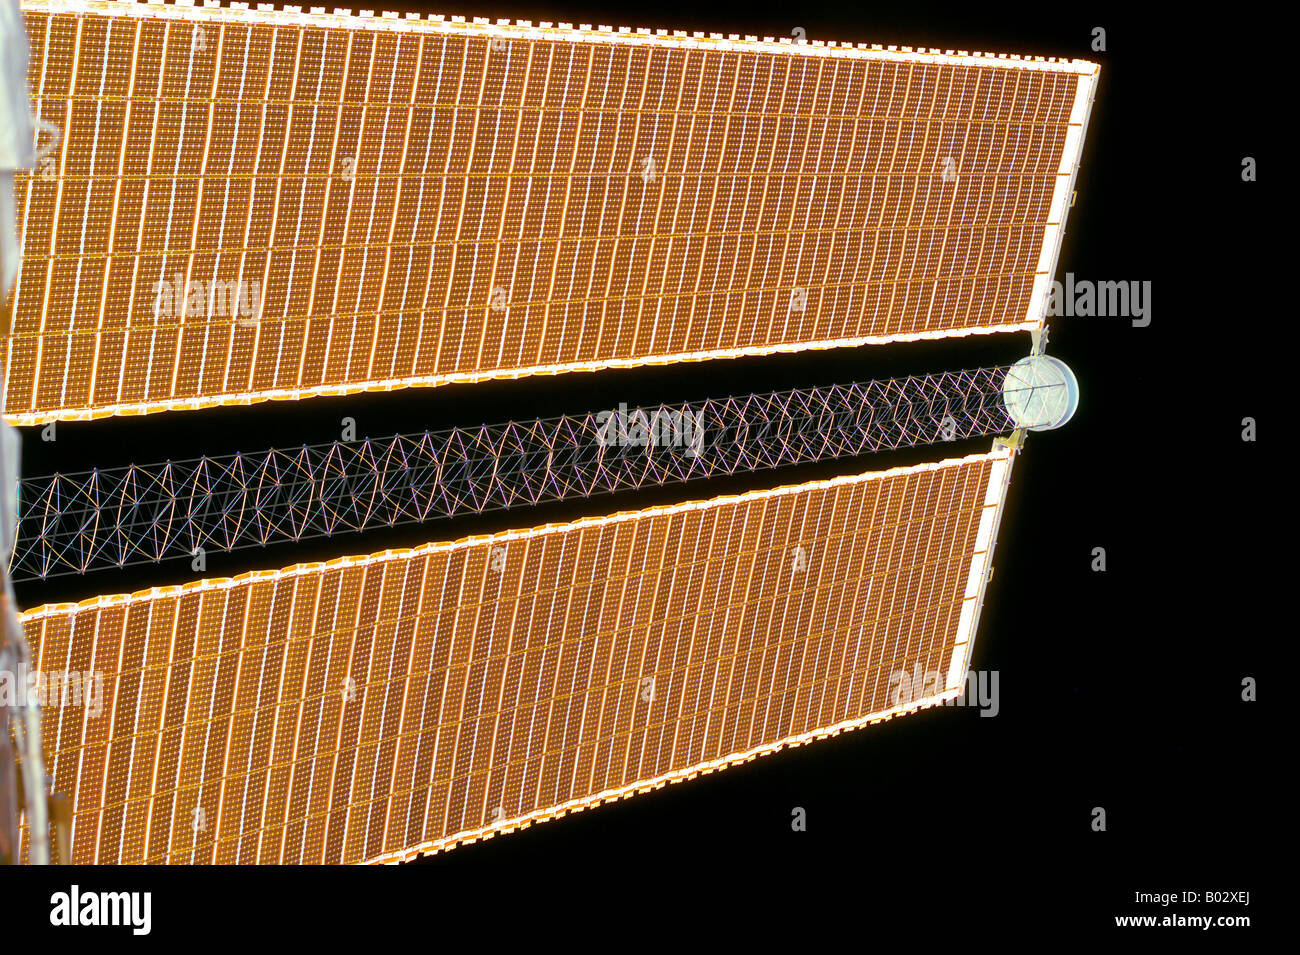 A close-up view of the solar arrays on the International Space Station. Stock Photo